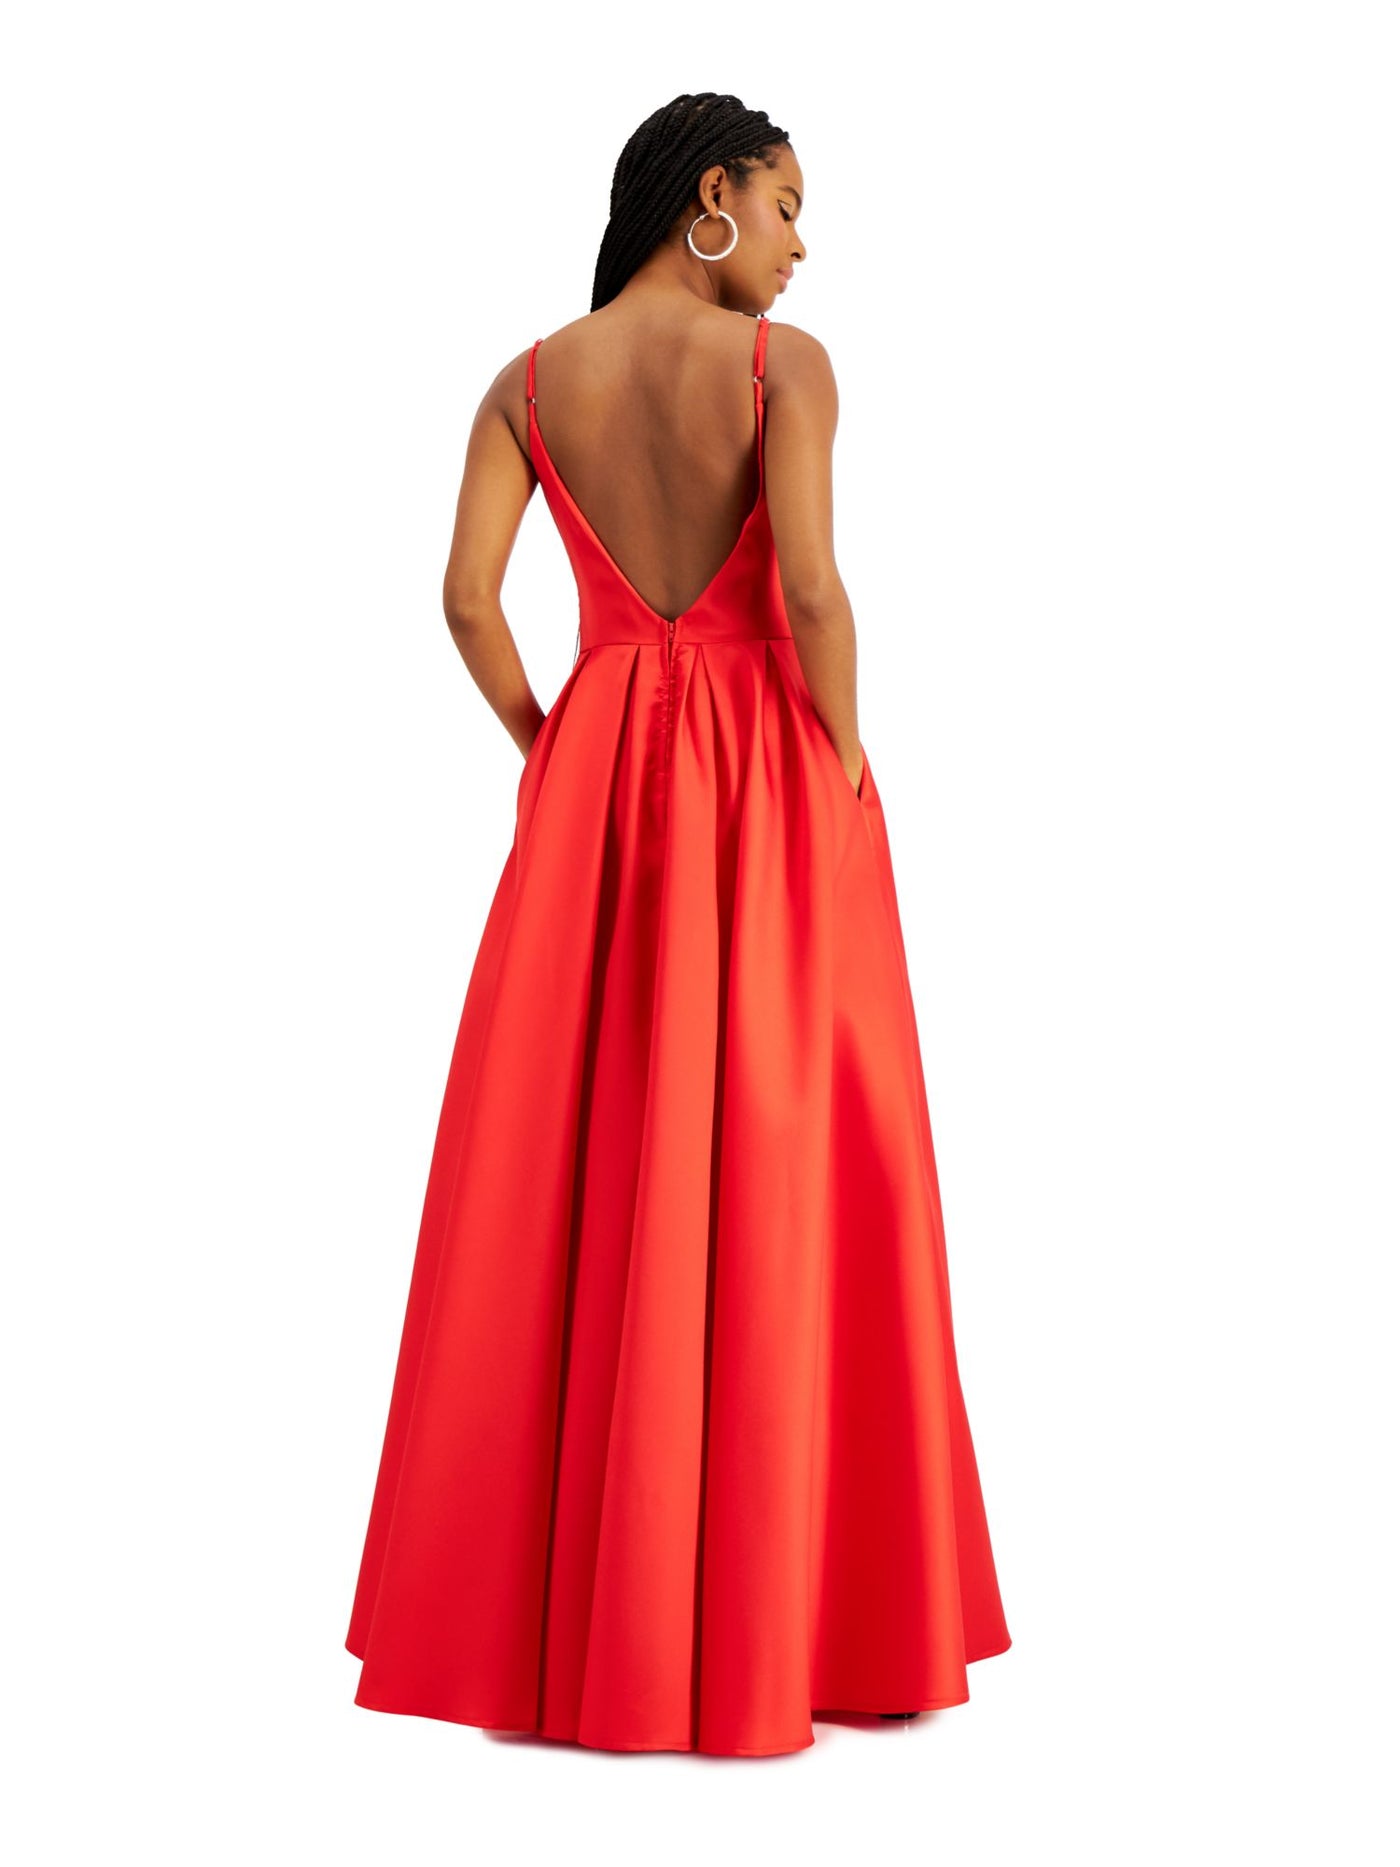 SAY YES TO THE PROM Womens Embellished Spaghetti Strap V Neck Full-Length Prom Fit + Flare Dress